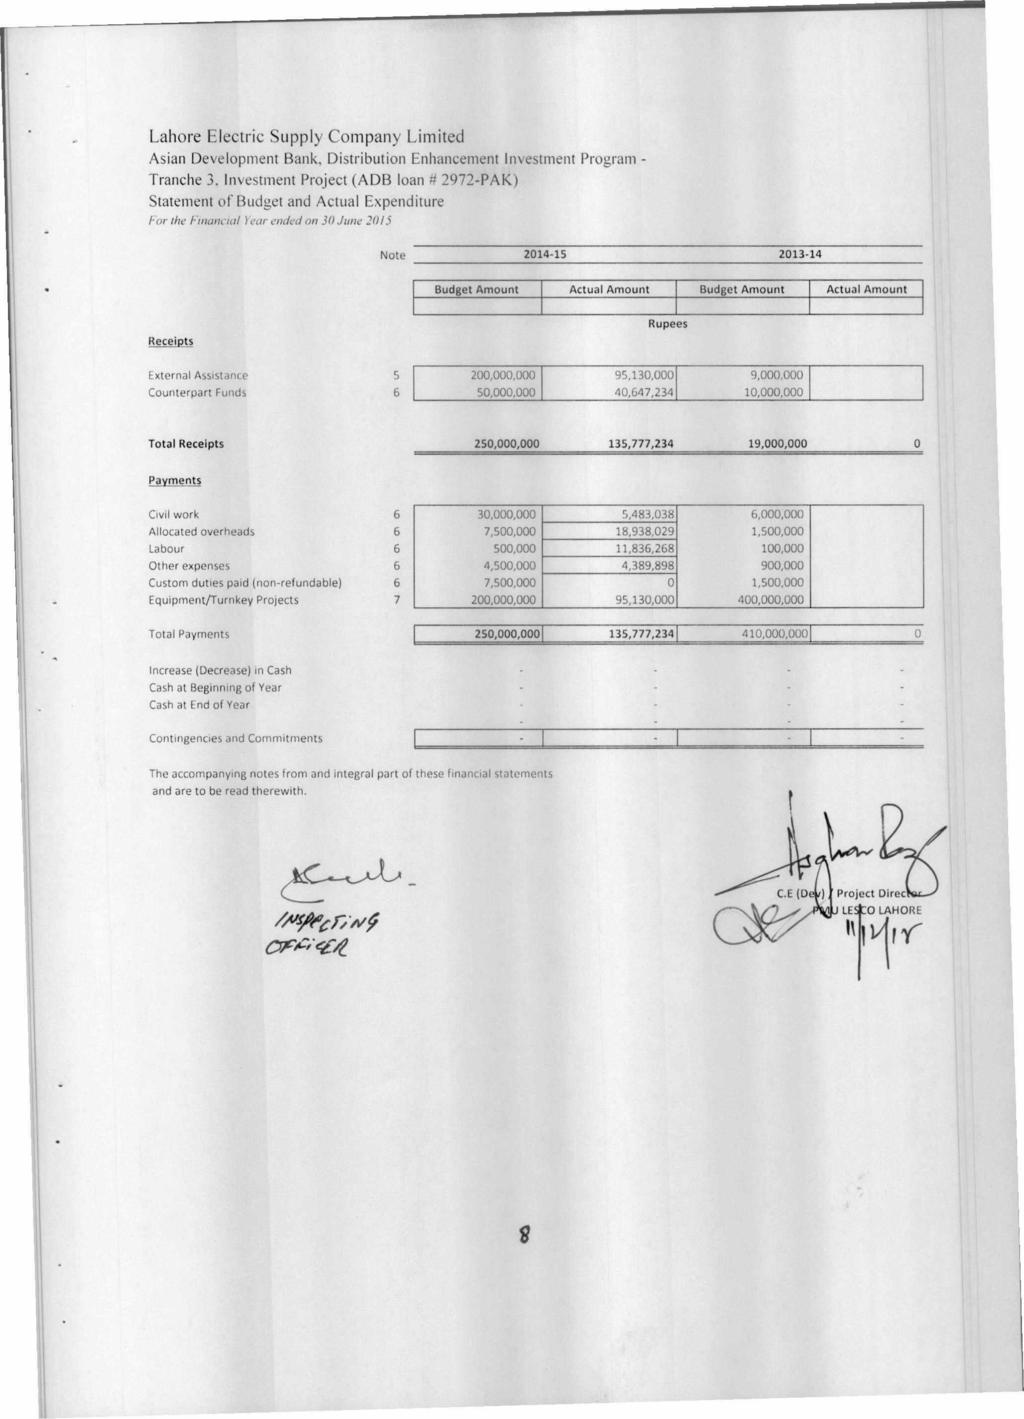 Lahore Electric Supply Company Limited Asian Development Bank, Distribution Enhancement Investment Program - Tranche 3, Investment Project (ADB loan # 2972-PAK) Statement of Budget and Actual